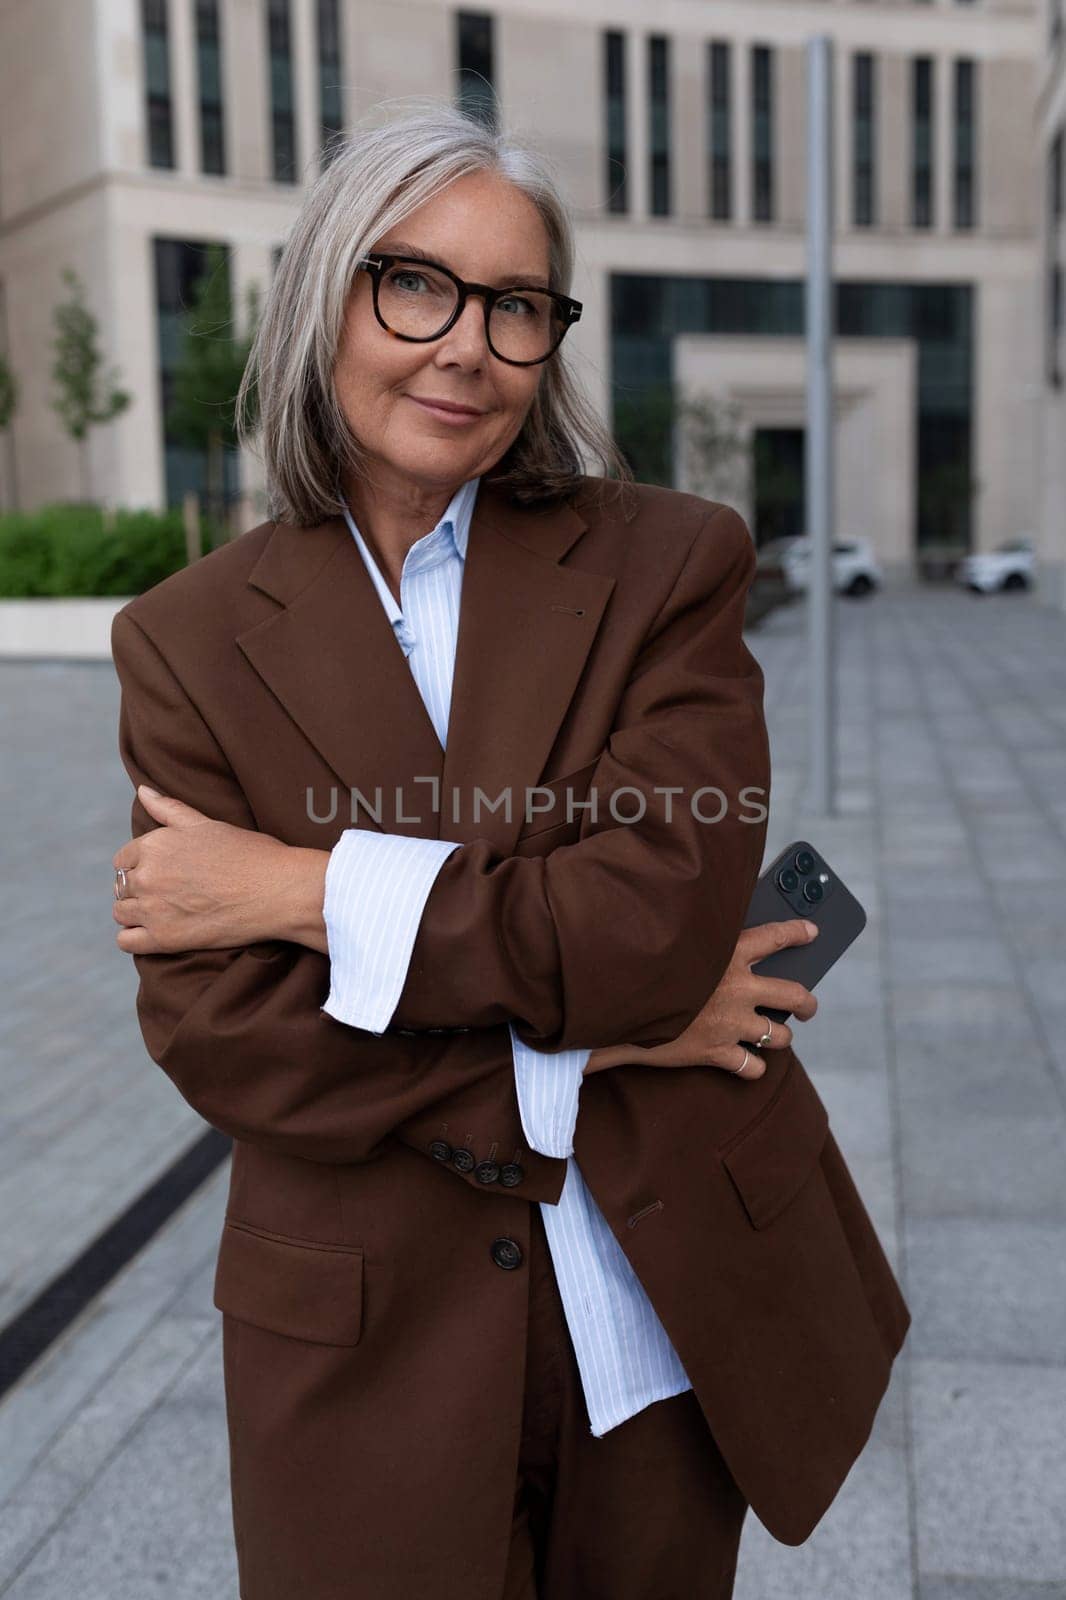 charming mature woman with gray hair in a stylish suit walks around the city.